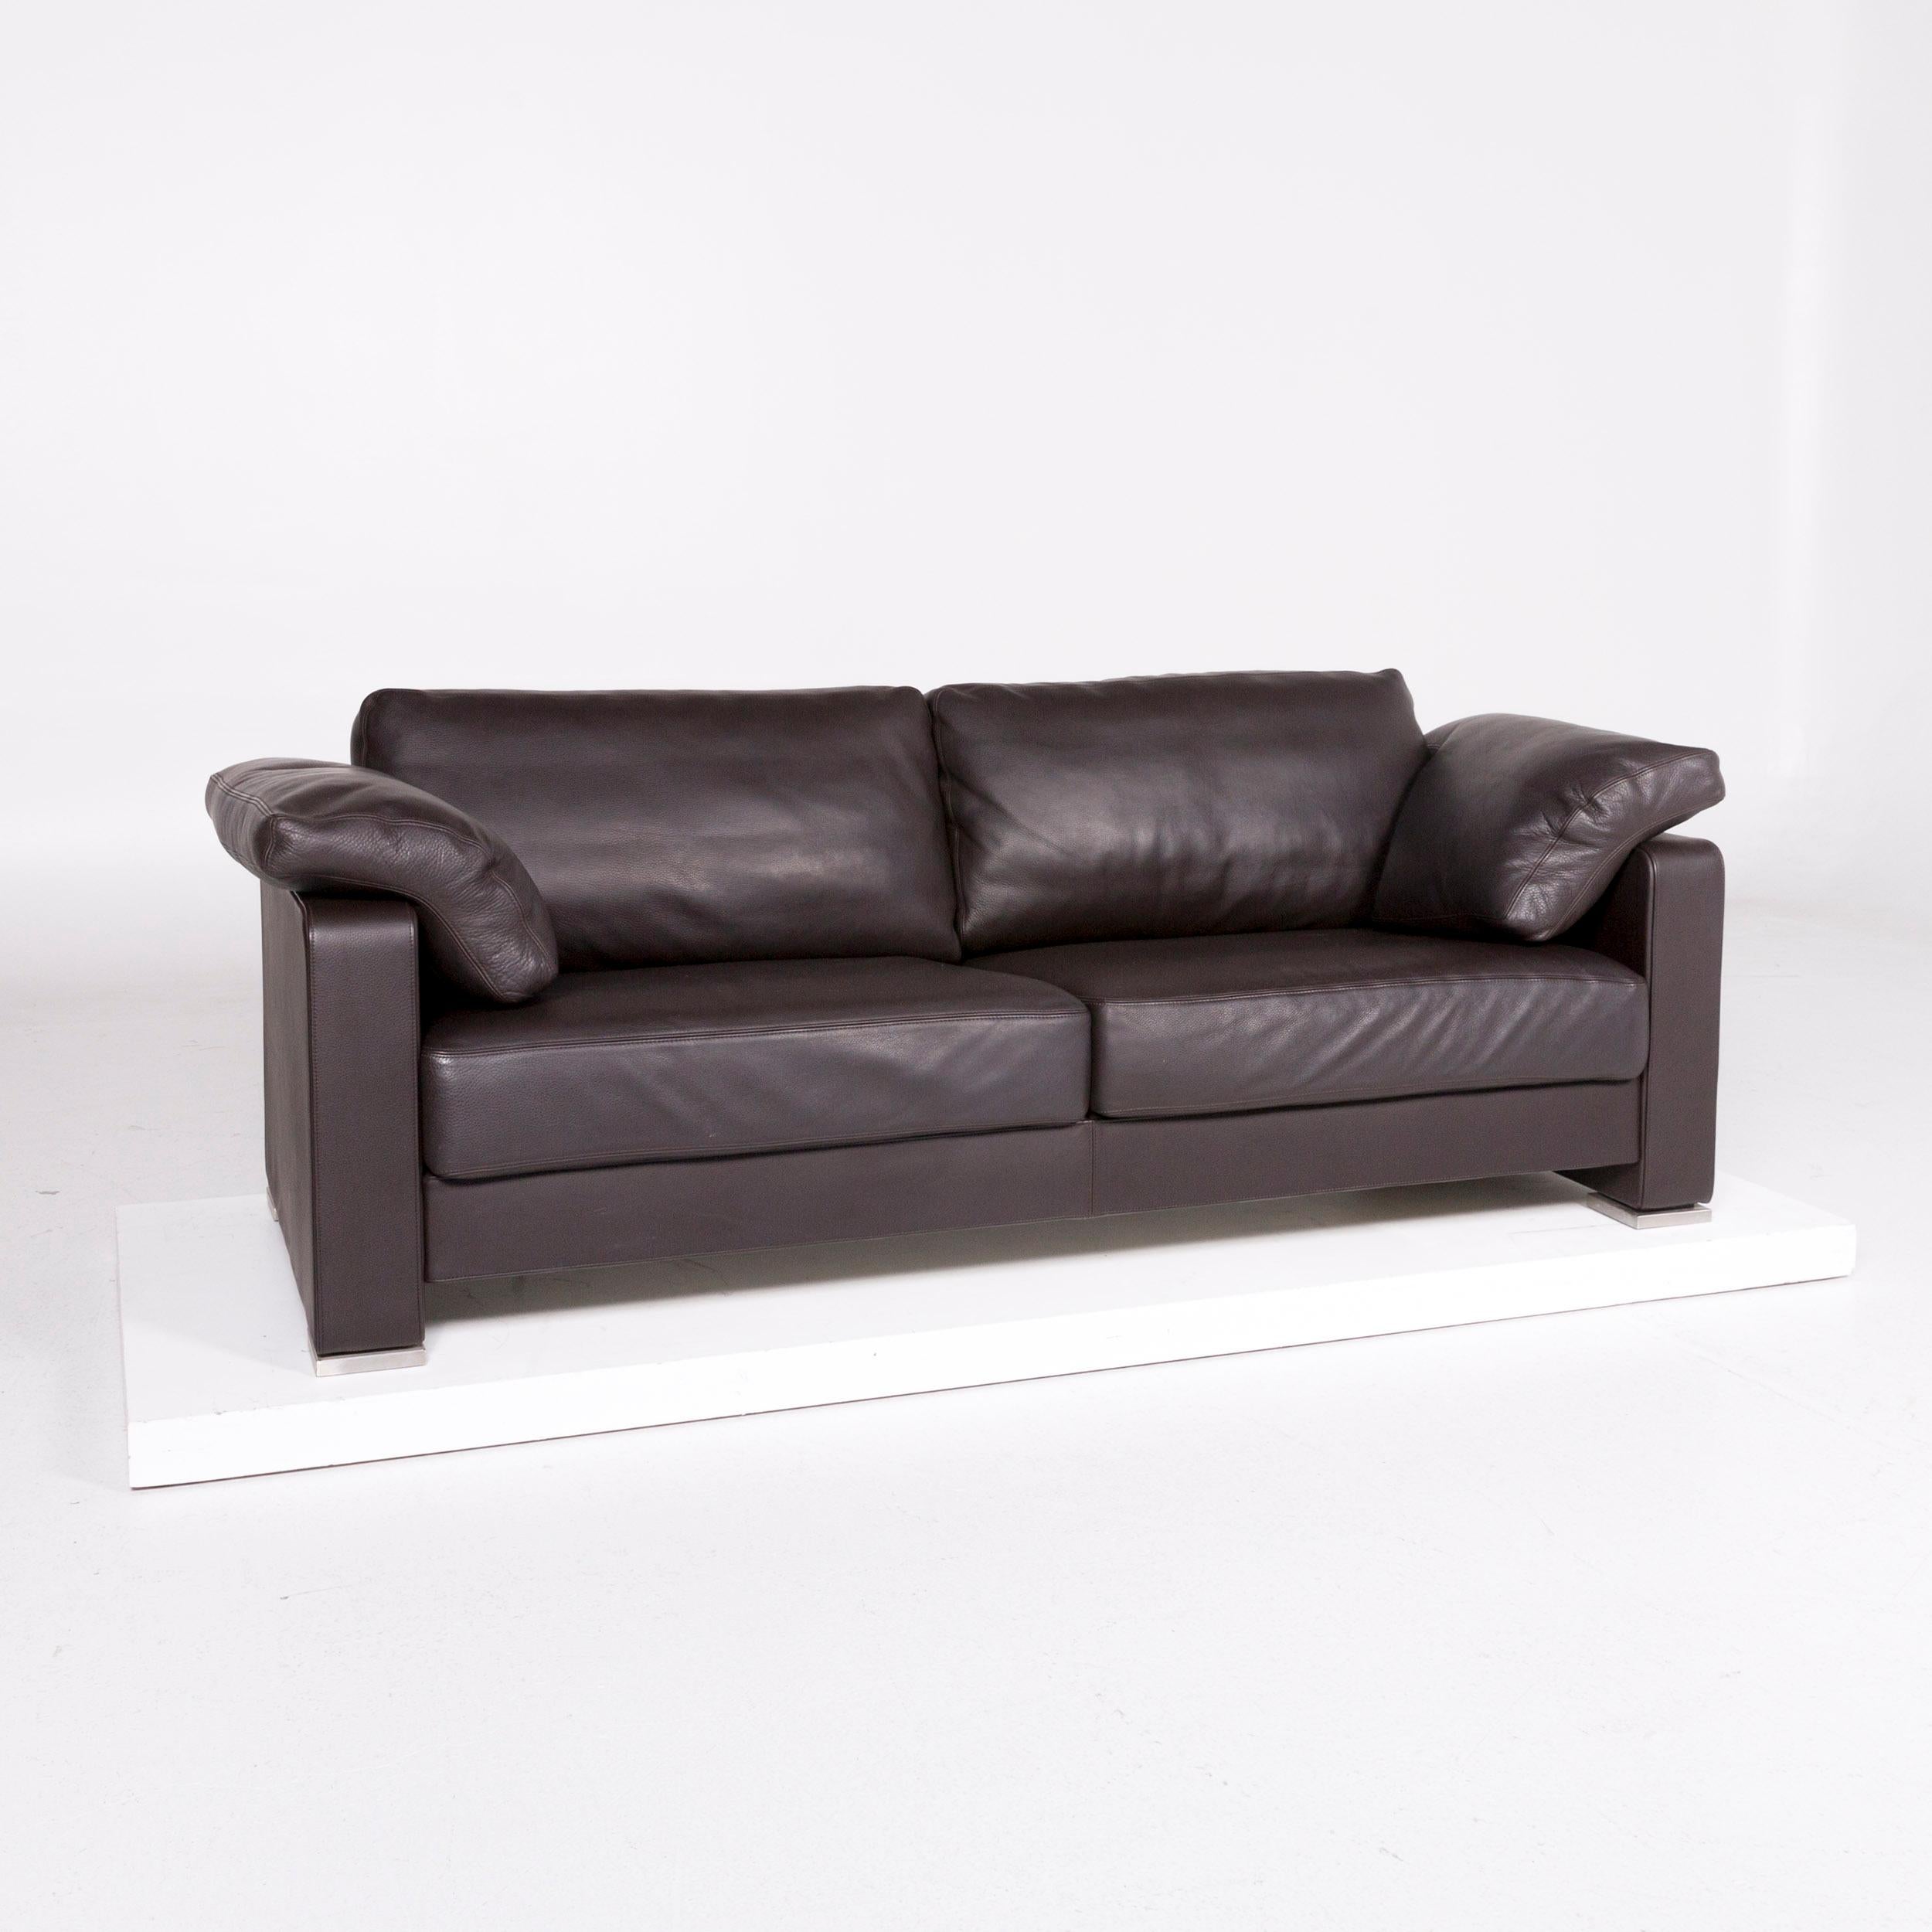 We bring to you a Gyform Composit A Divano 206 leather sofa set brown dark brown 2x two-seat.
 
 
 Product measurements in centimeters:
 
 Depth 89
Width 210
Height 81
Seat-height 52
Rest-height 74
Seat-depth 52
Seat-width